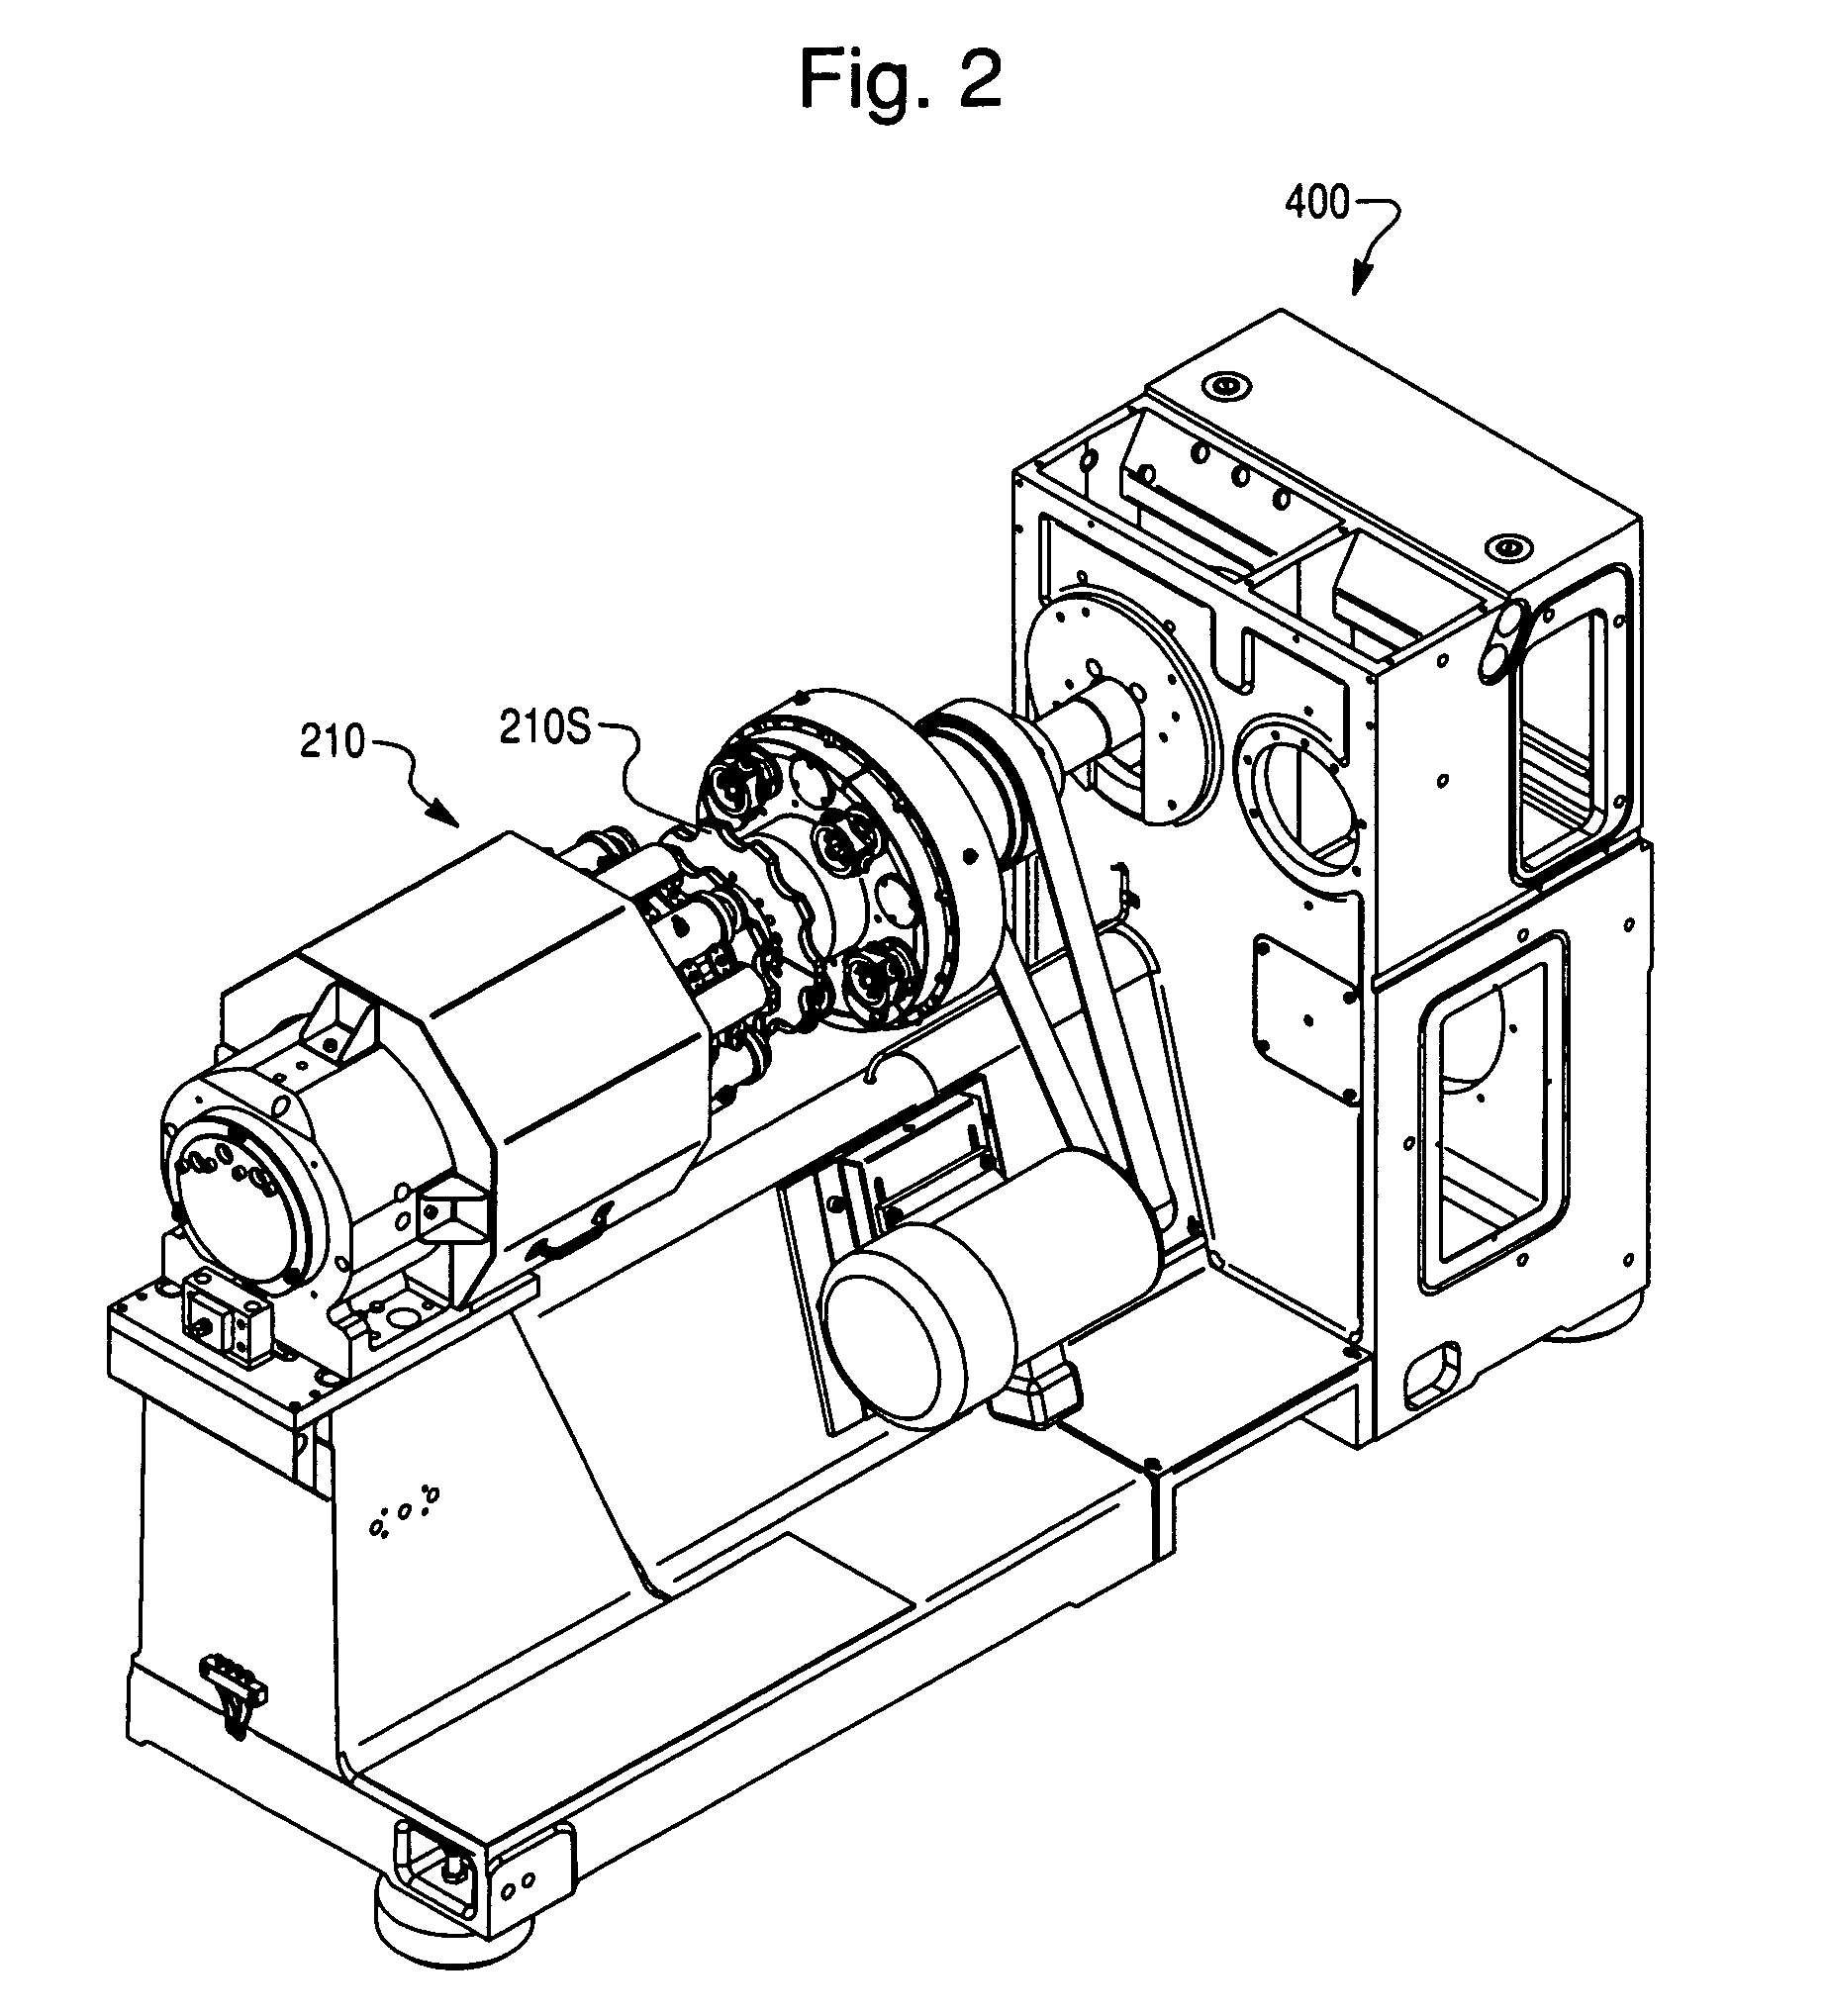 Apparatus for curling an article